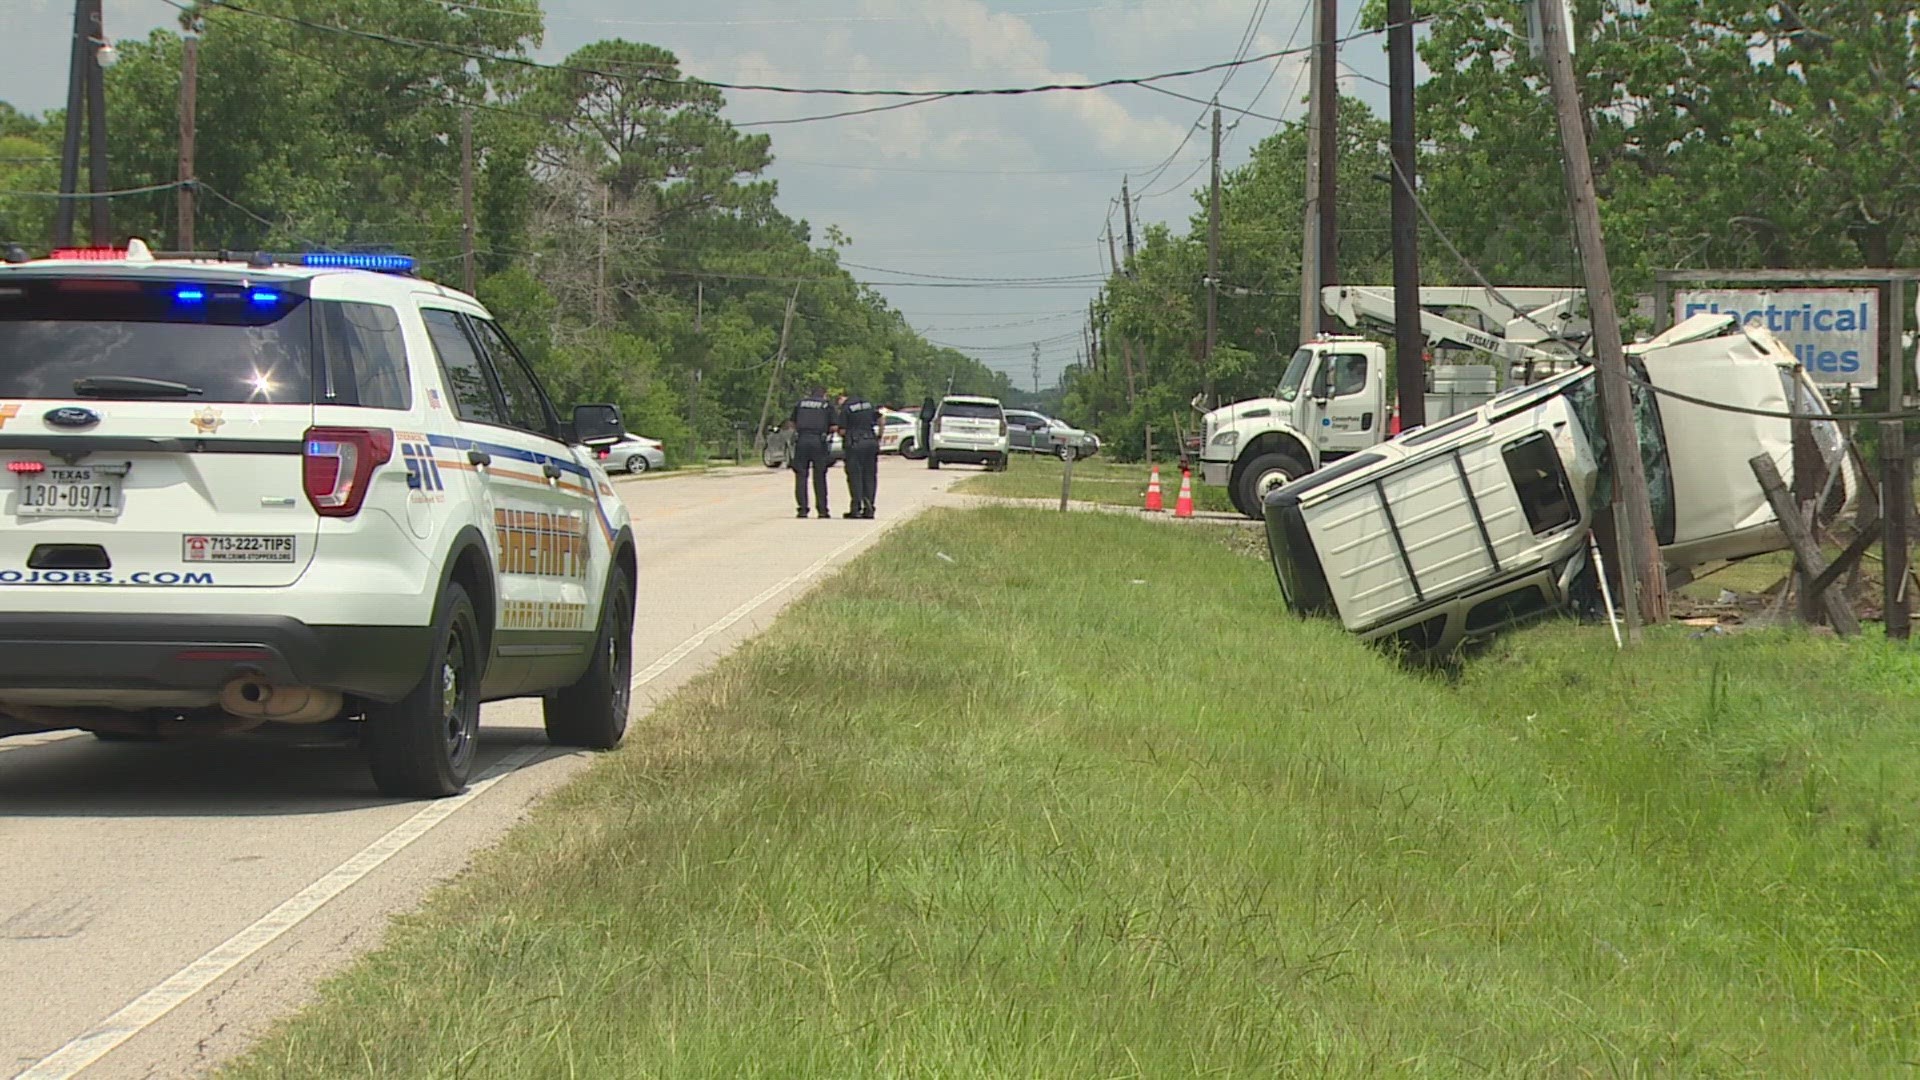 A 40-year-old man and a 3-year-old boy were in an SUV when it crashed into a utility pole in the Baytown area. The man survived but the boy died at the scene.